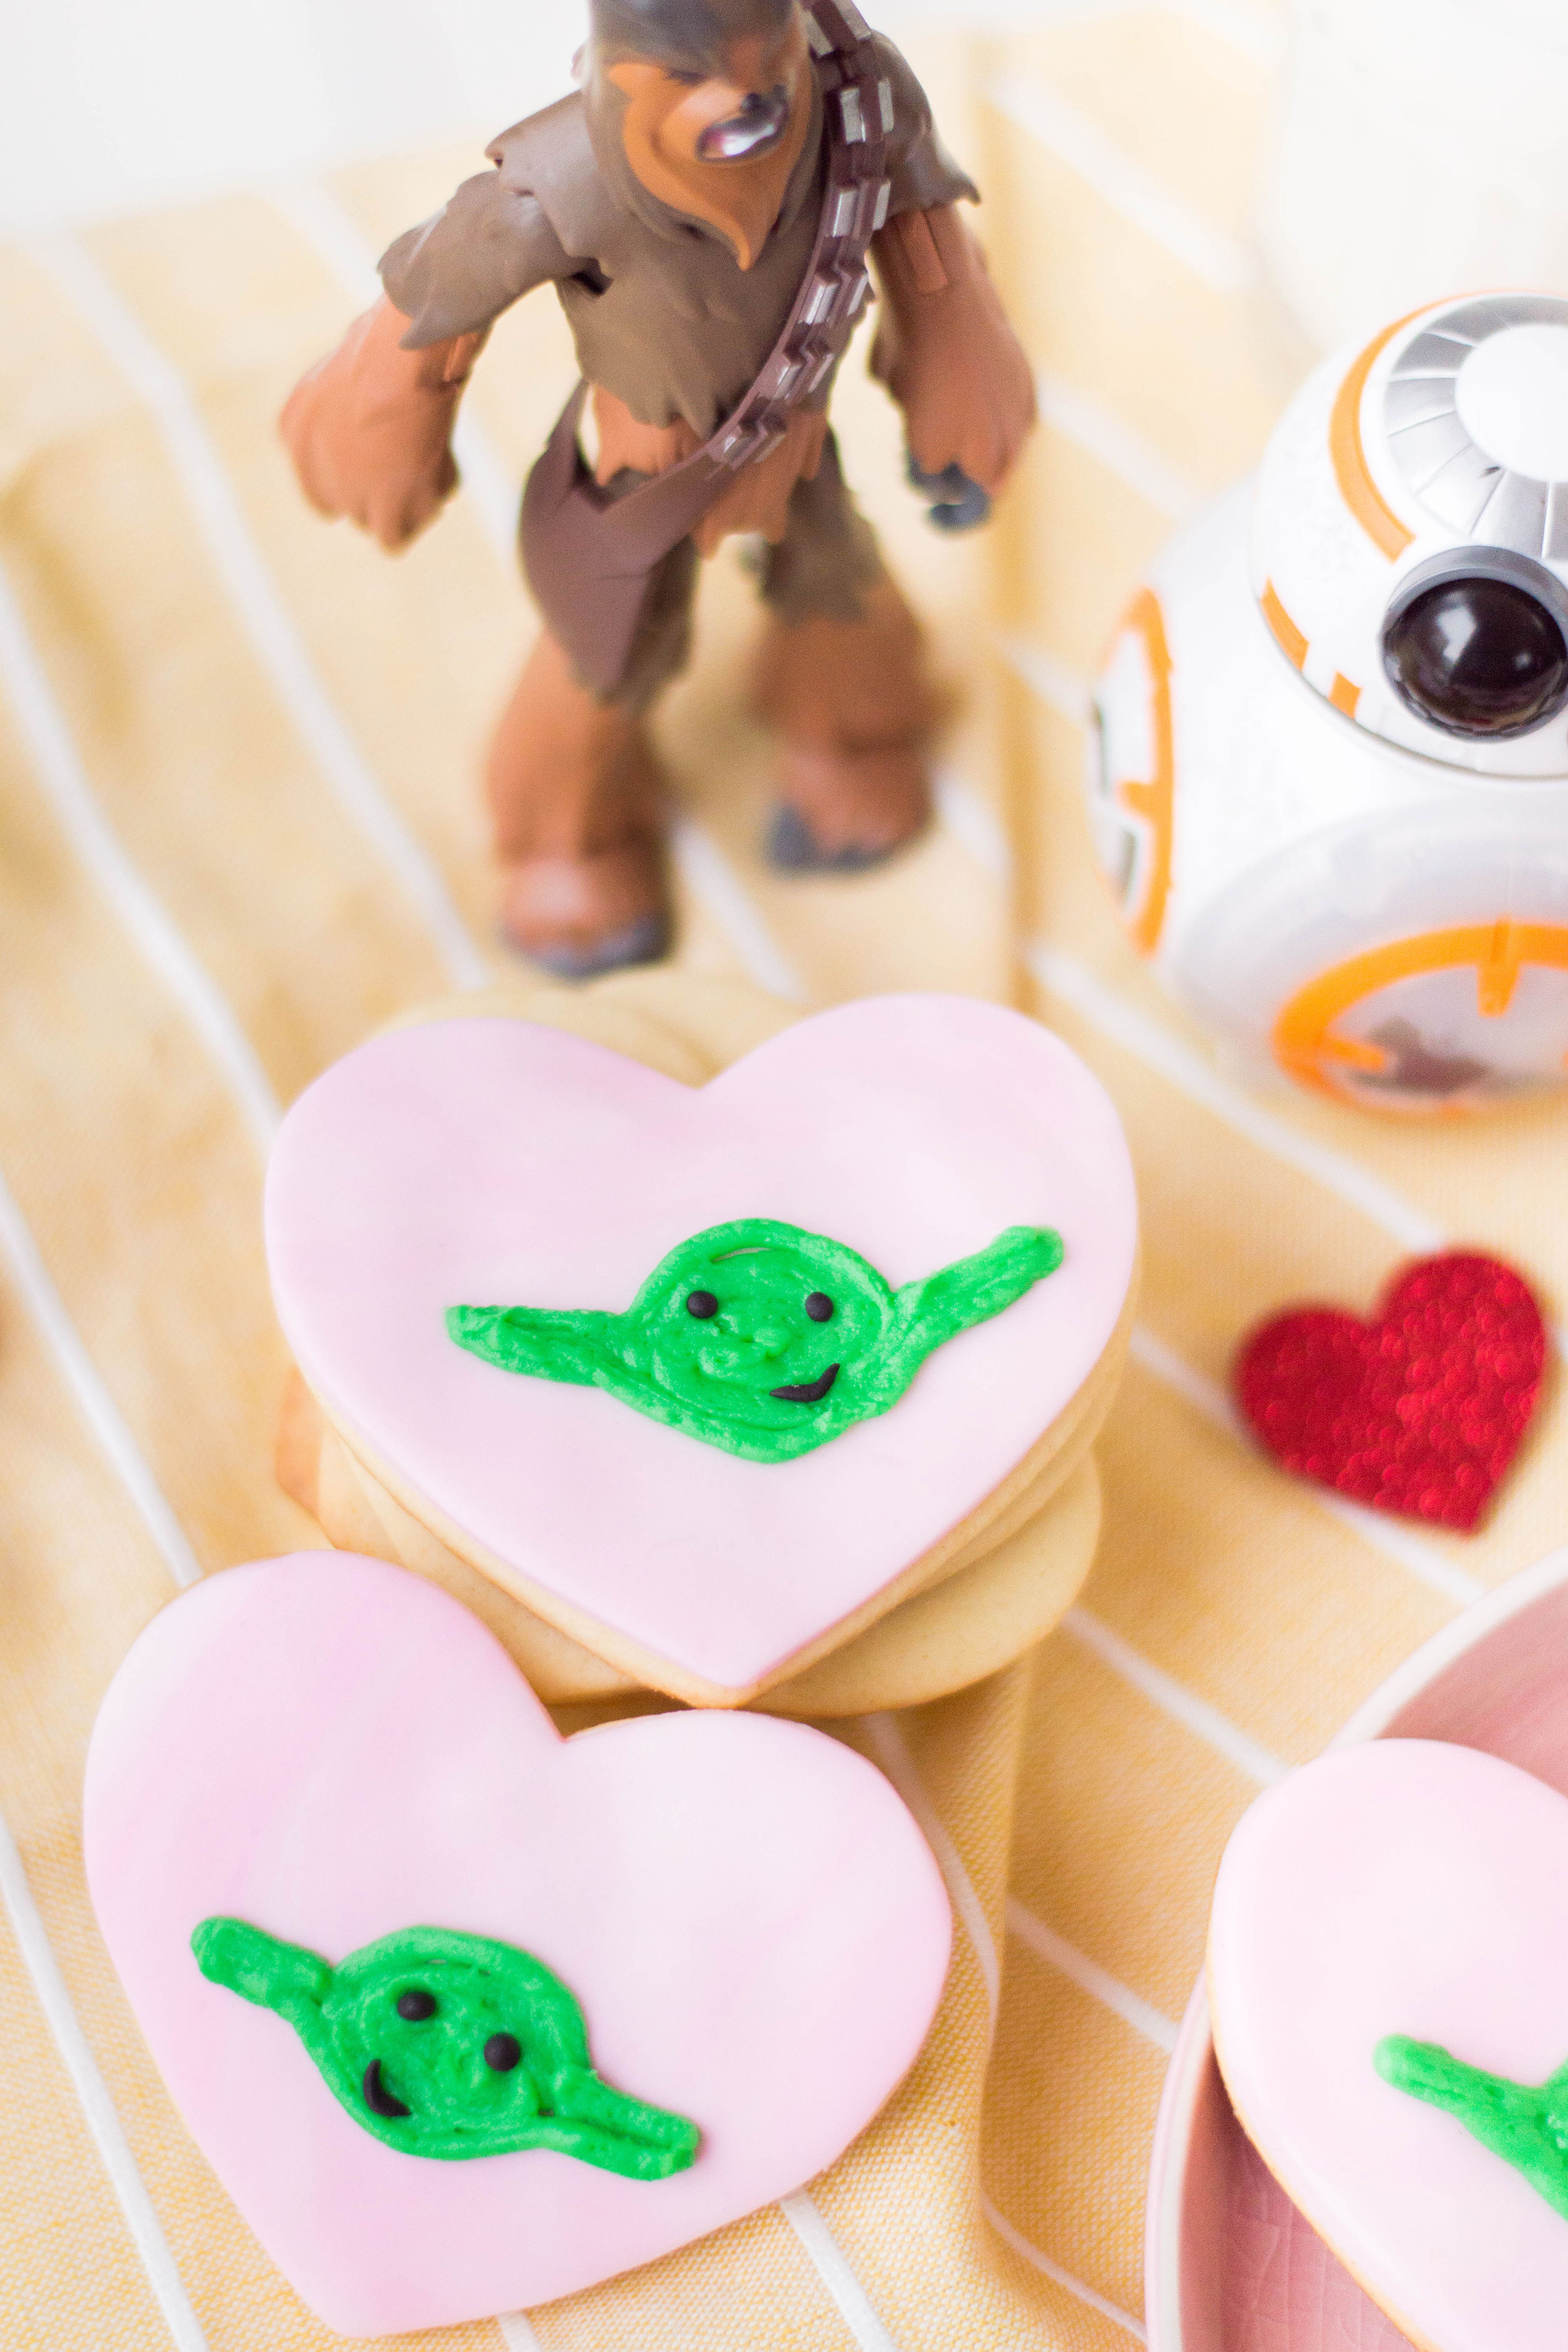 Too cute, these are. Celebrate Valentine's Day with these ultra cute heart-shaped Yoda Sugar Cookies. The force can be romantic, too! #valentinesdayrecipes #starwarscookies